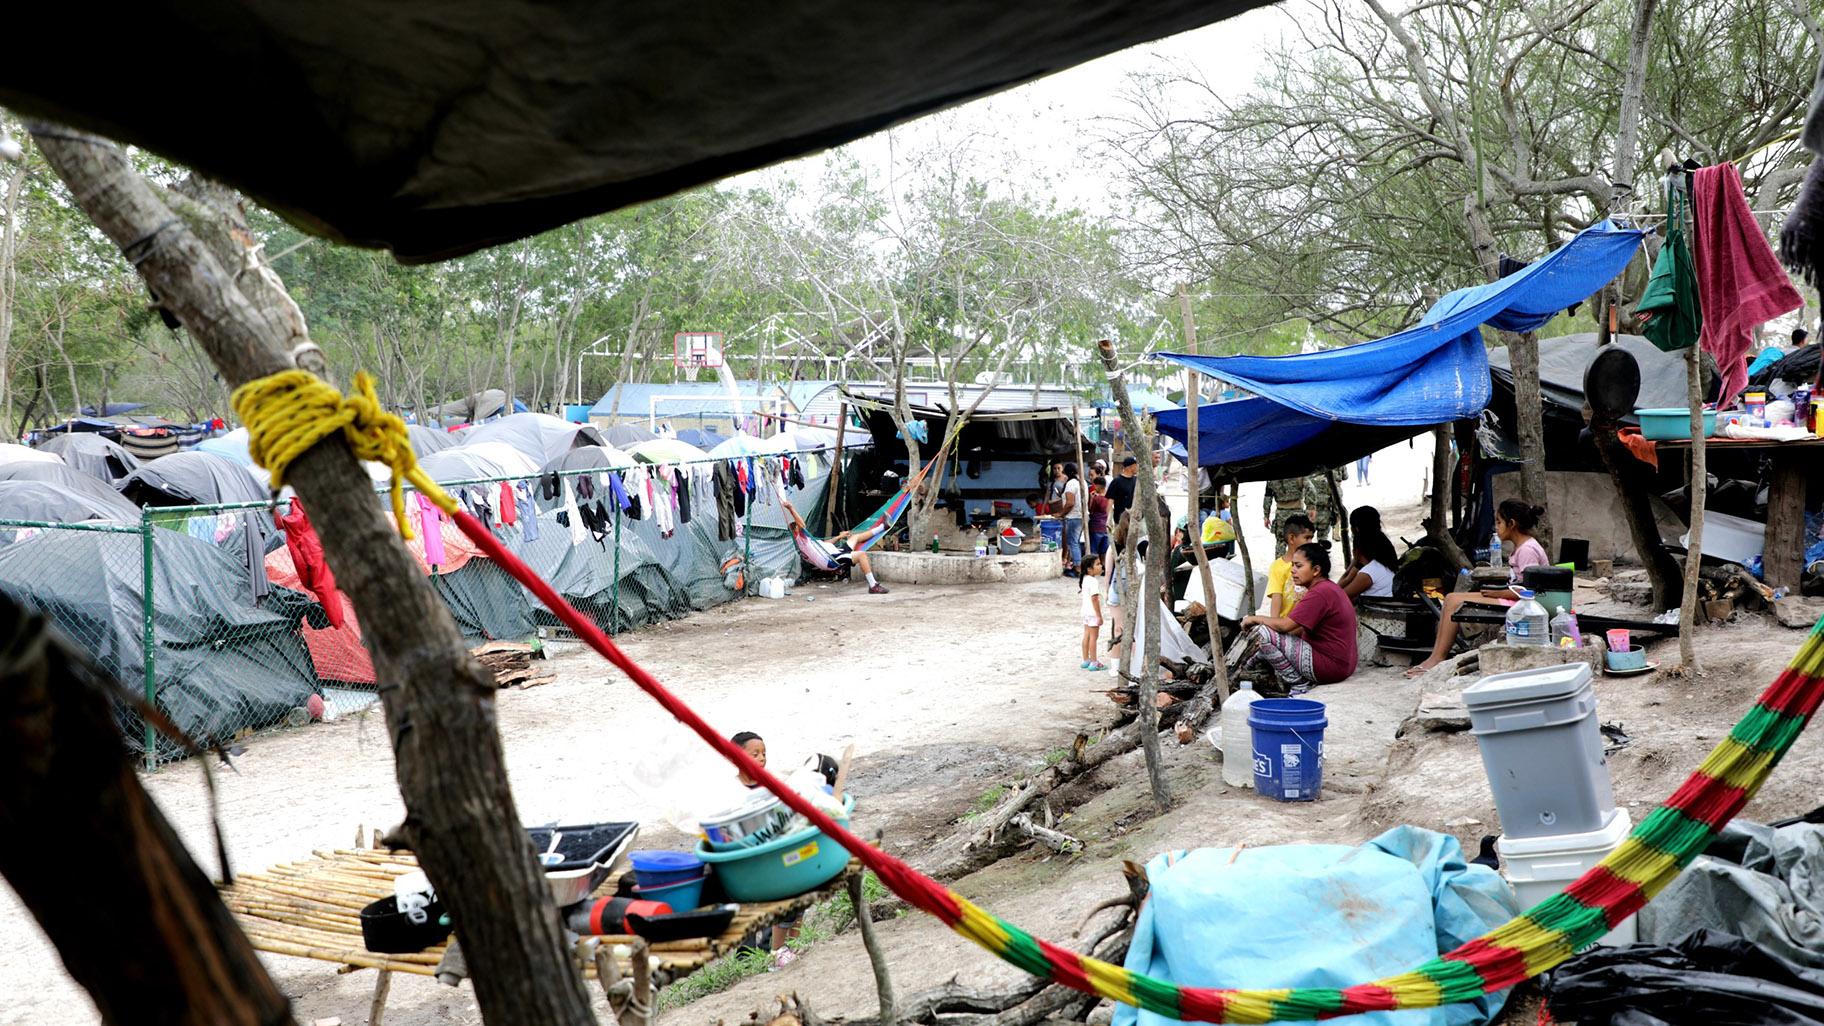 A migrant camp in Matamoros, Mexico, where thousands of asylum-seekers have been living for months as they wait for their court hearings. The camp is without running water or working toilets. (Credit: Maria Ines Zamudio)